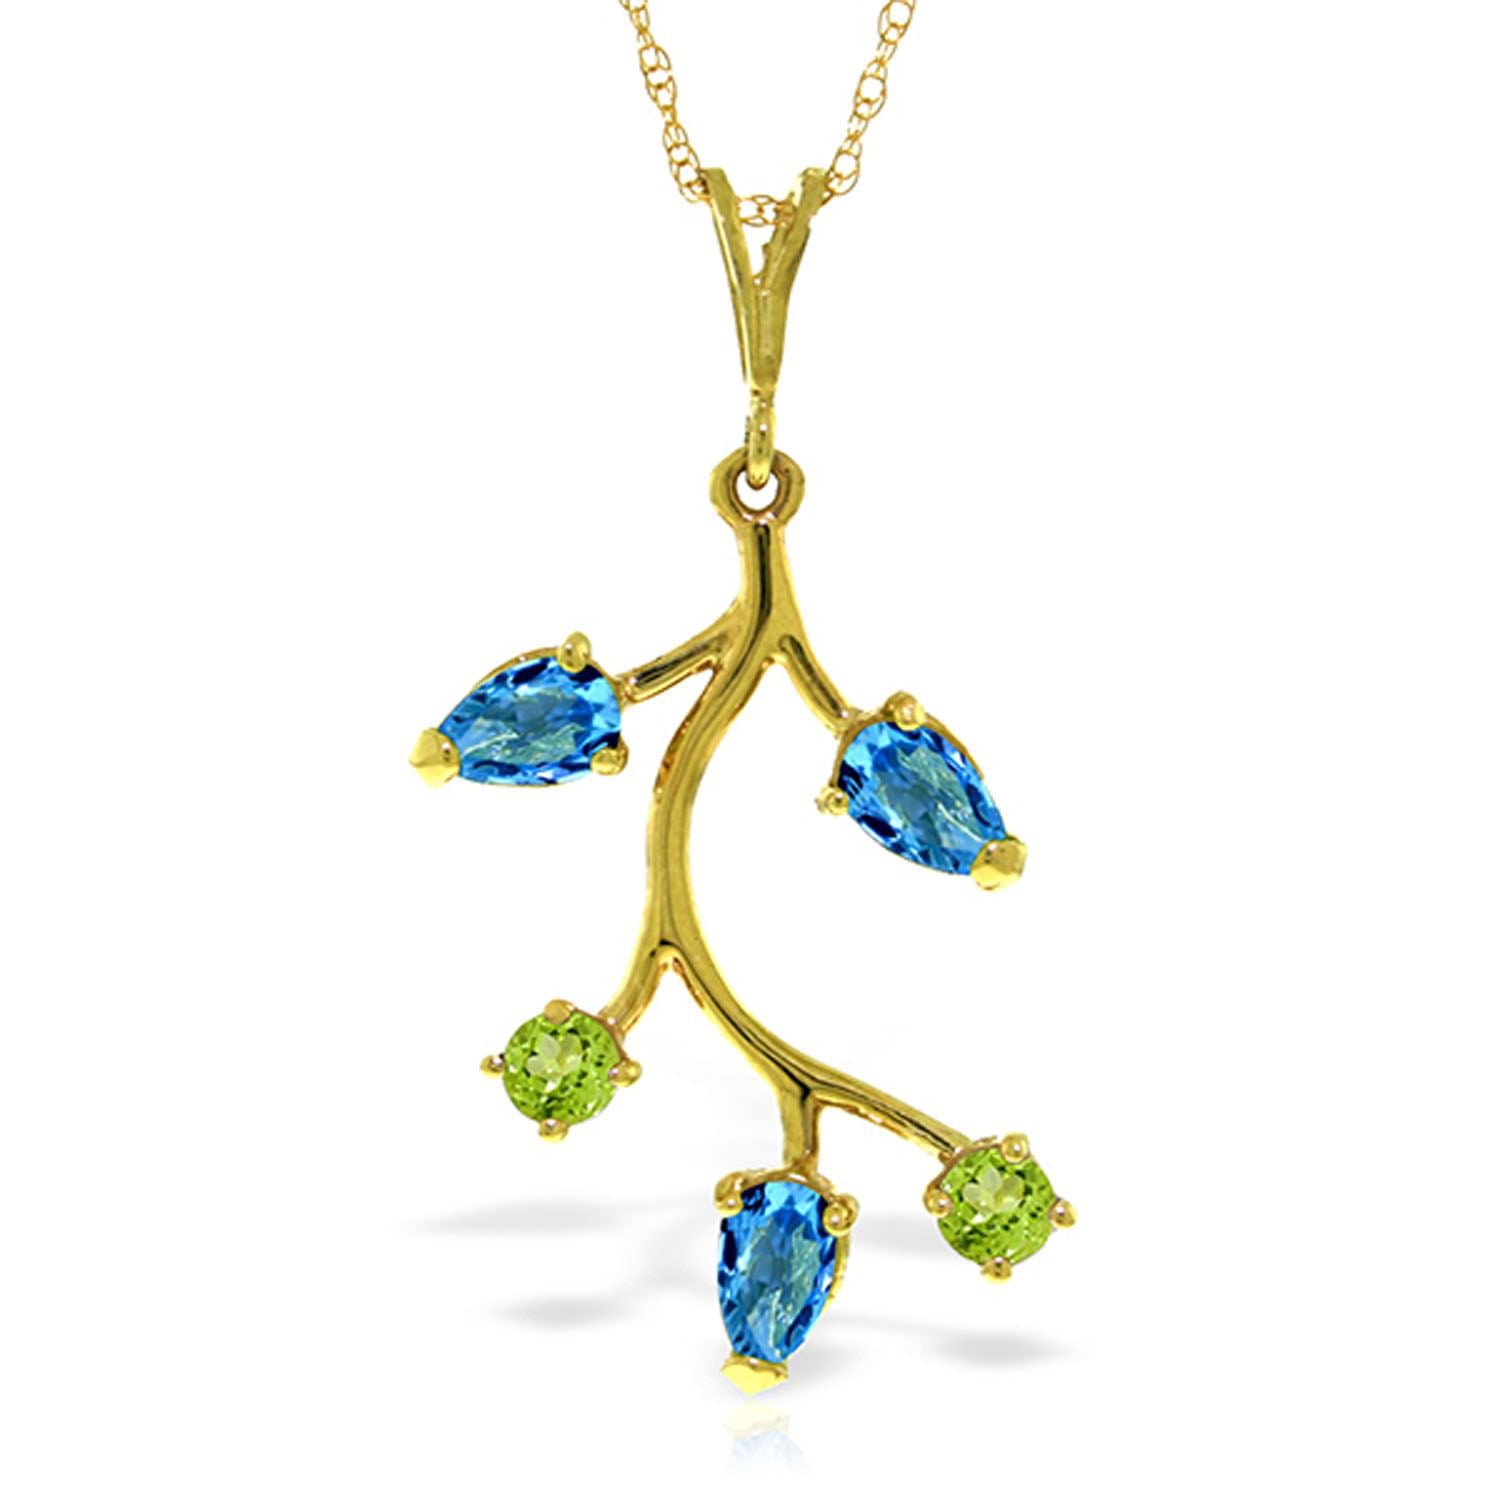 ALARRI 0.55 Carat 14K Solid Gold Directions To Love Peridot Necklace with 18 Inch Chain Length